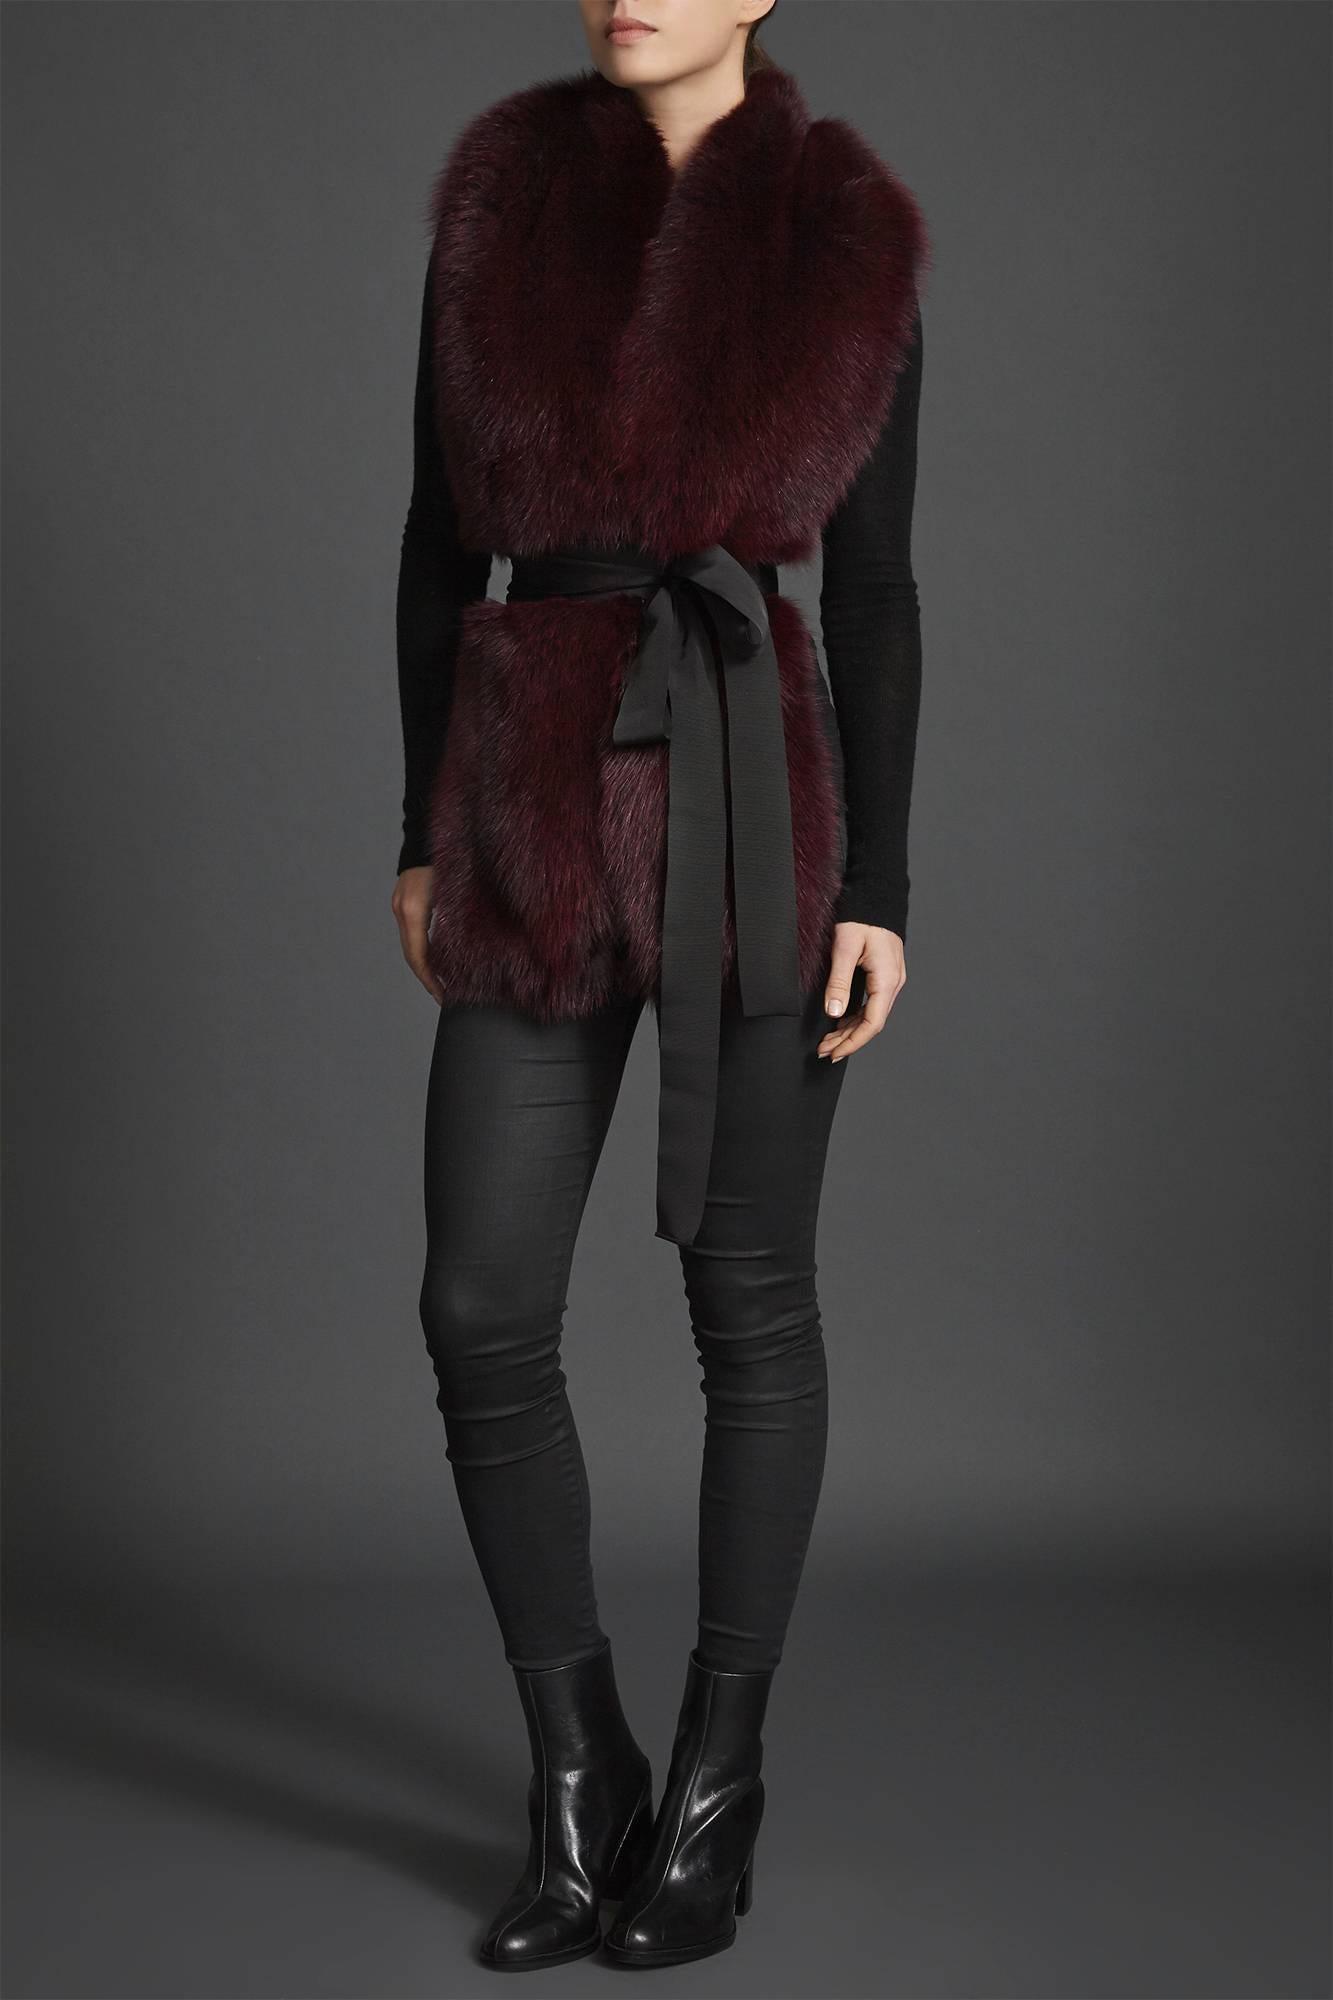 Verheyen London Legacy Stole Scarf in Garnet Burgundy Fox Fur with Belt 

The Legacy Stole is Verheyen London’s versatile design to be worn from day to night. Crafted in the finest dyed fox fur and lined in coloured silk satin.  A structured design